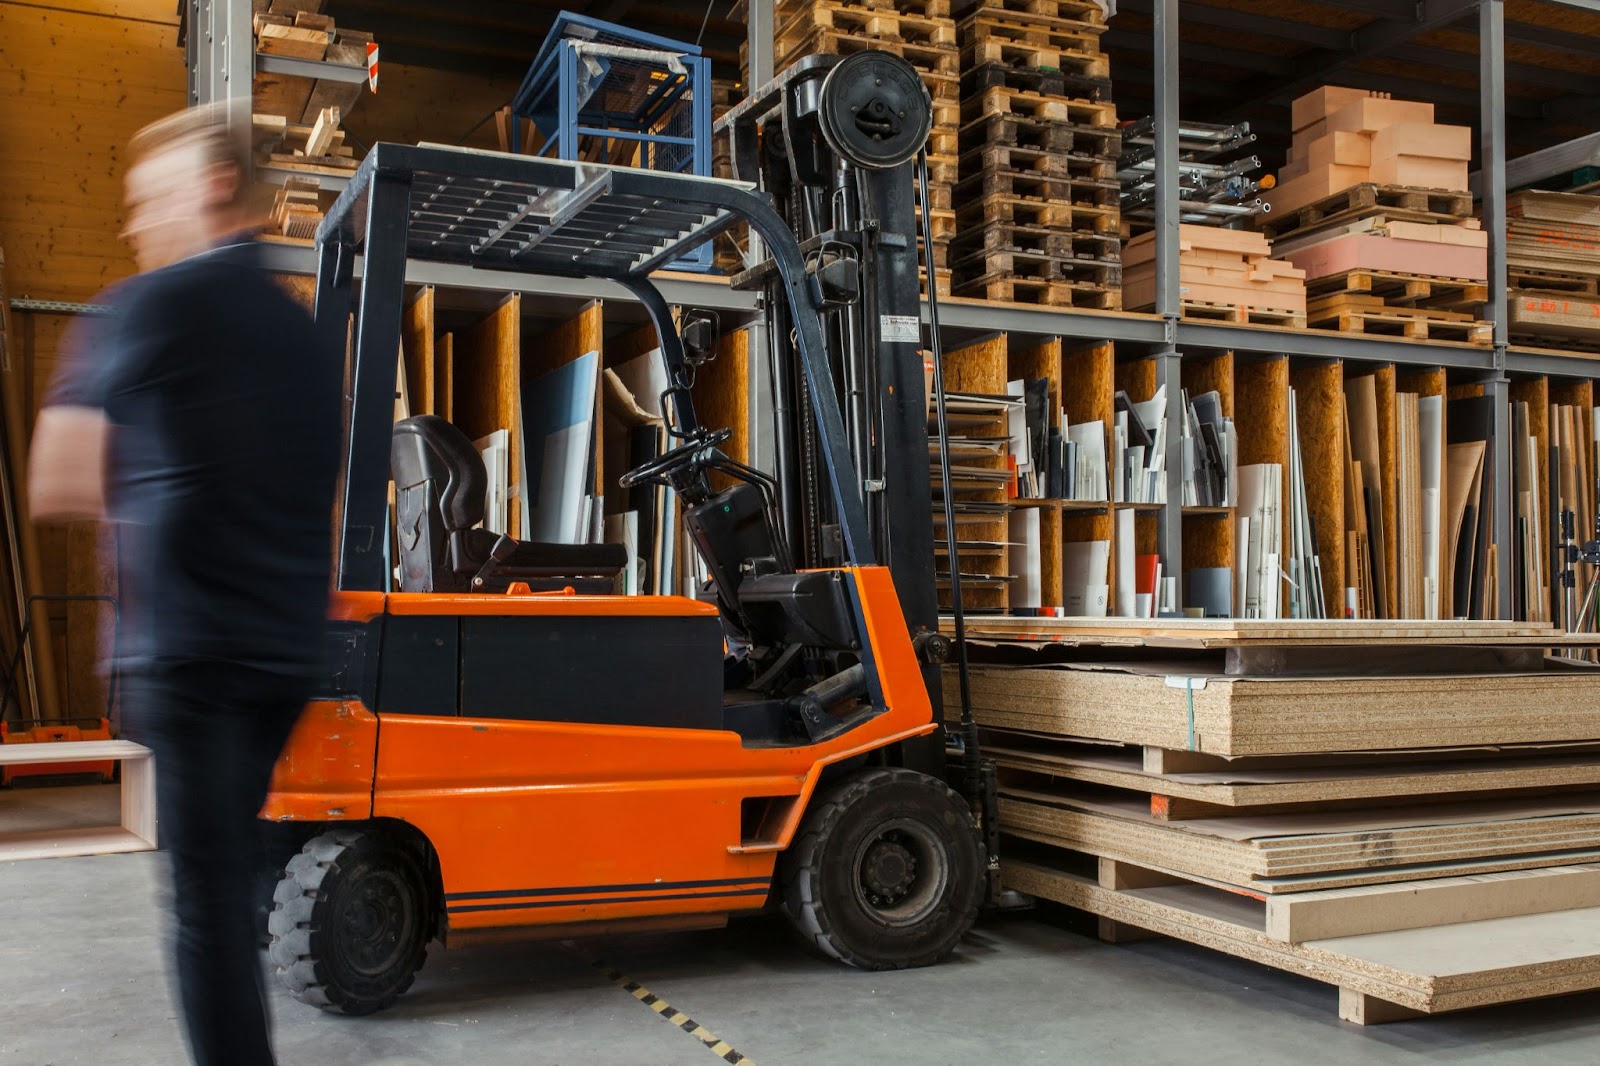 A forklift hauling wood, with a person walking by the forklift